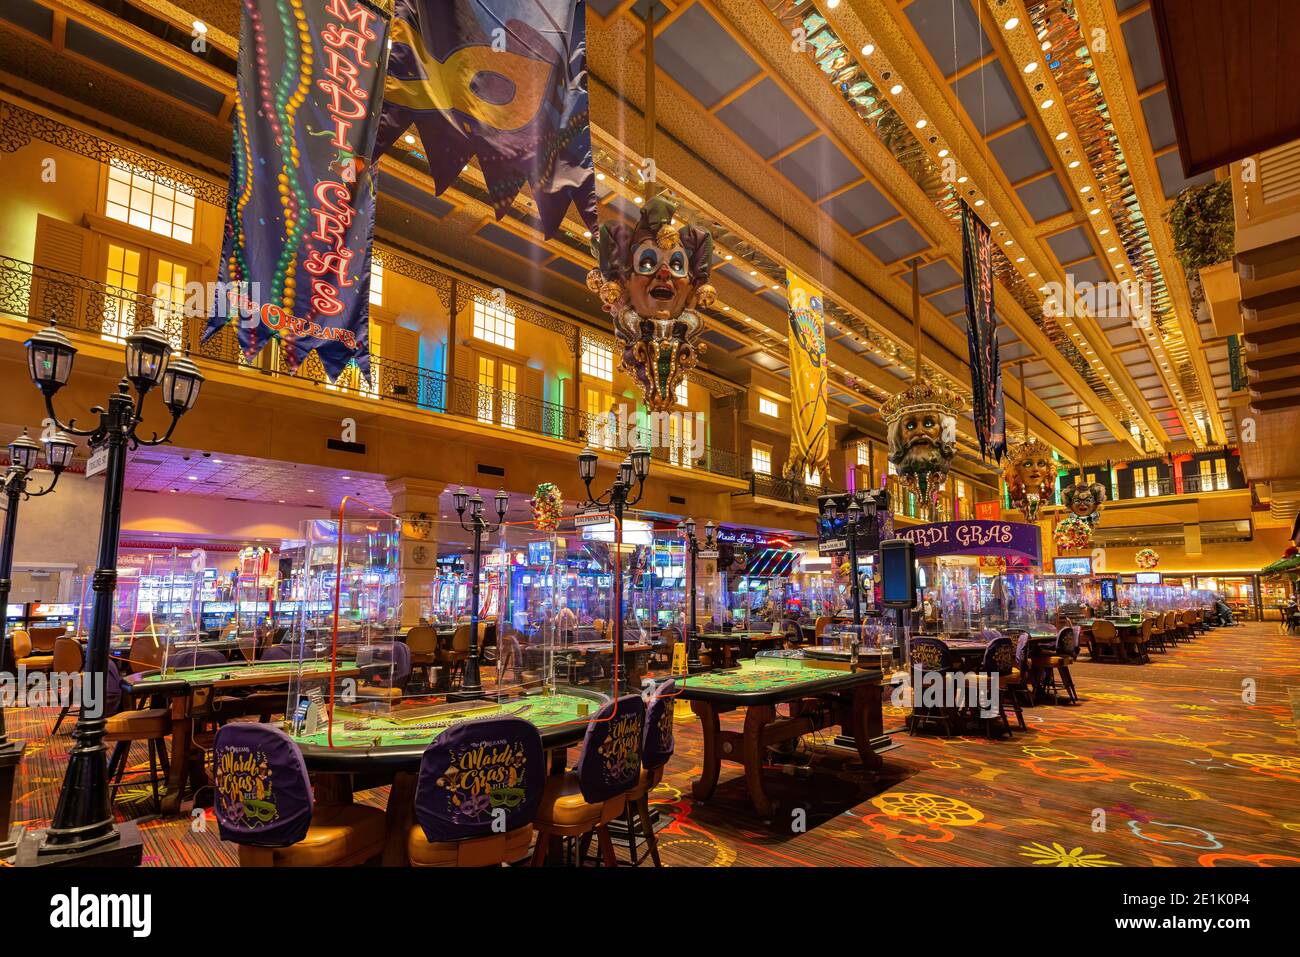 Las Vegas, DEC 22, 2020 - Interior view of The Orleans Hotel and Casino  Stock Photo - Alamy